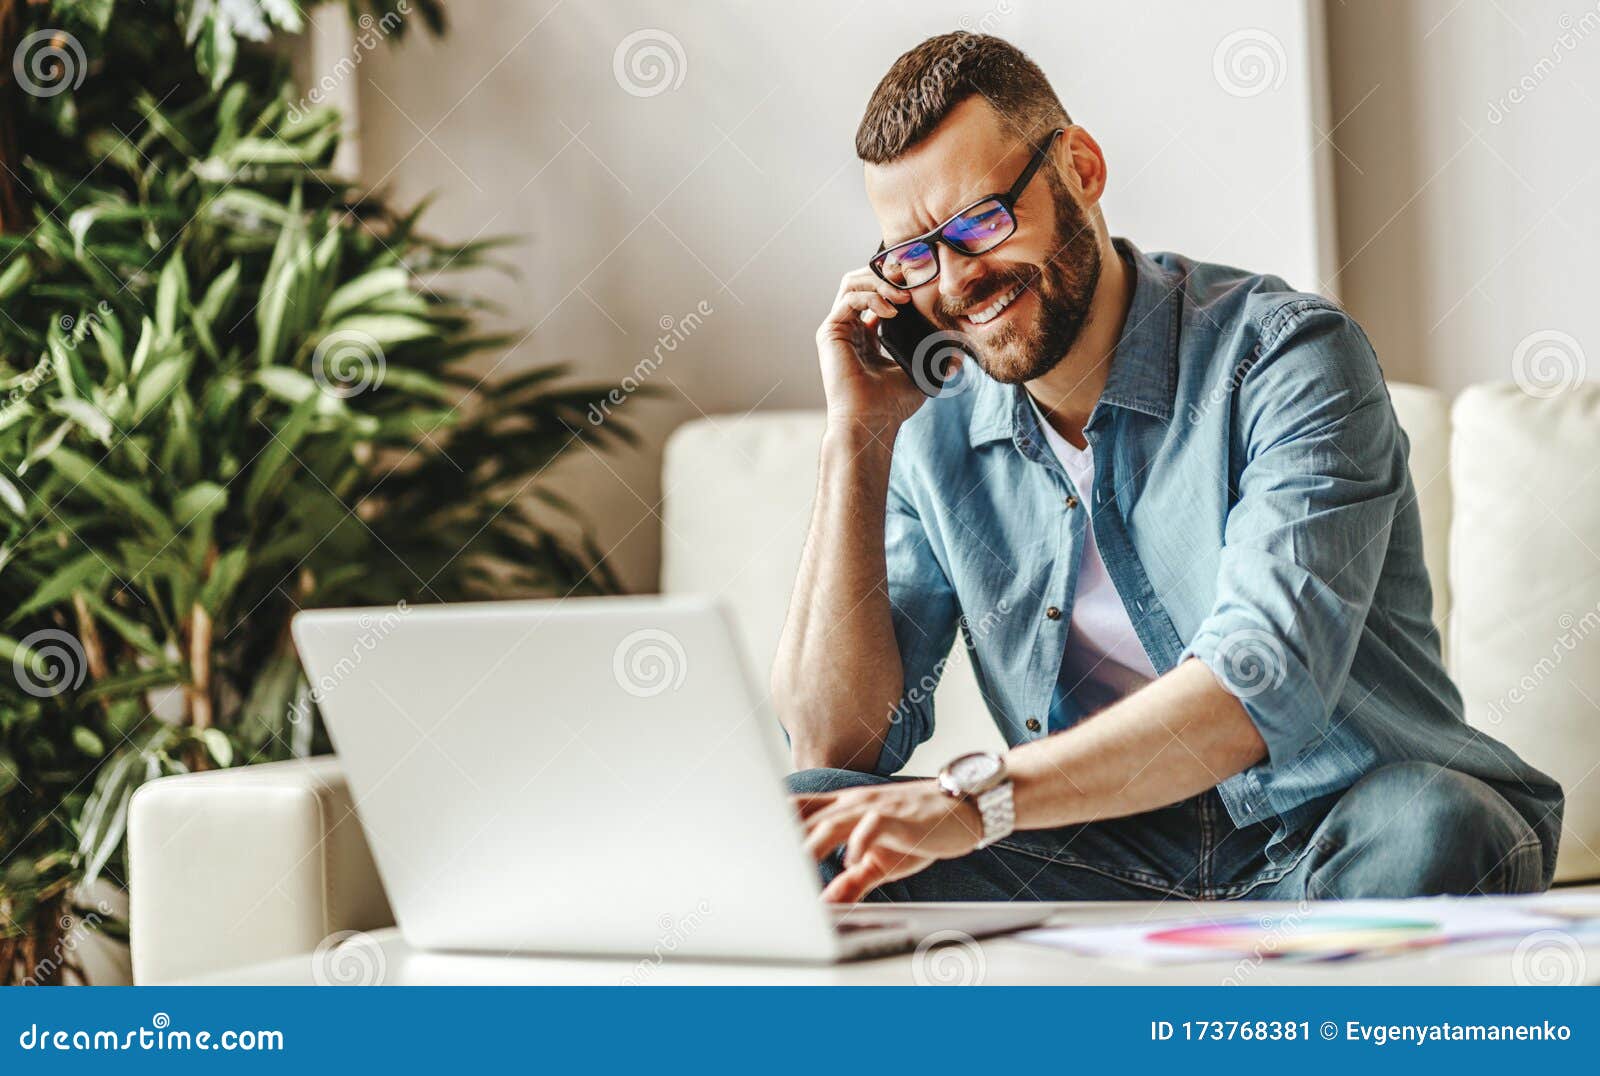 young   man freelancer working at home on a computer